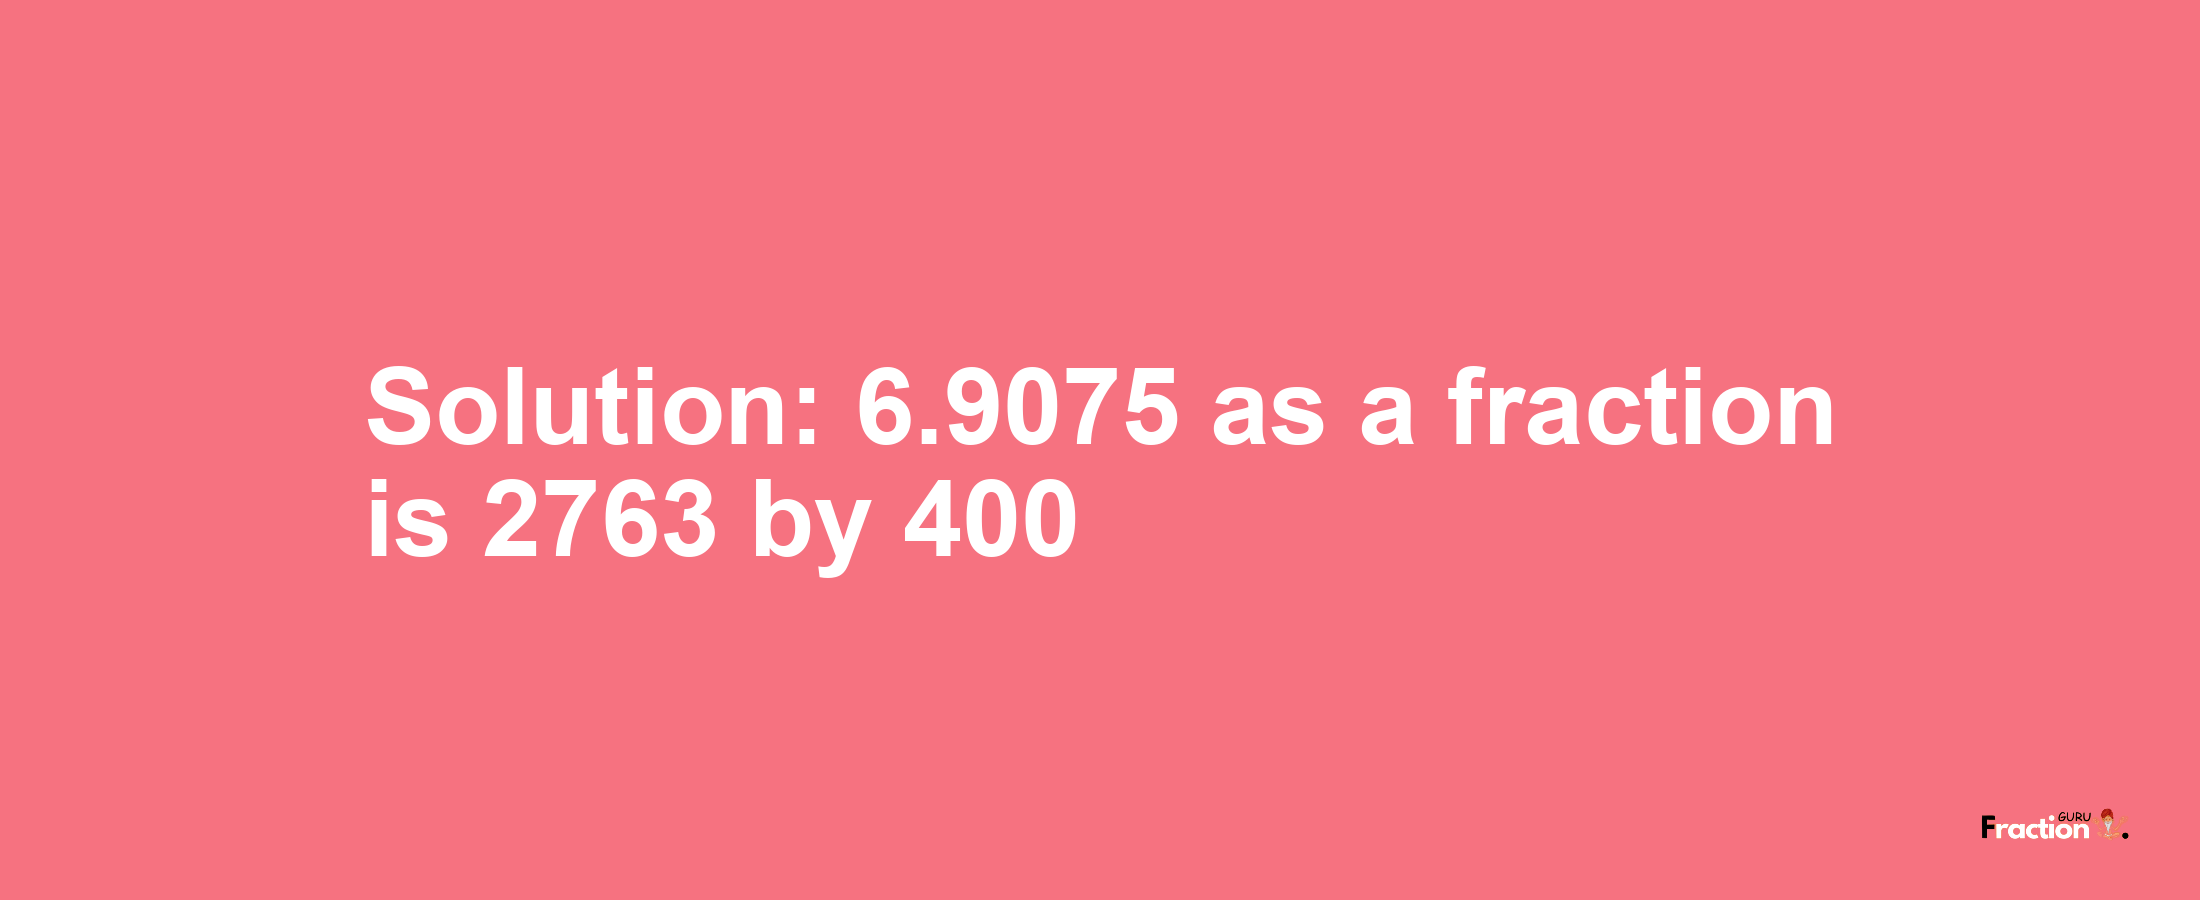 Solution:6.9075 as a fraction is 2763/400